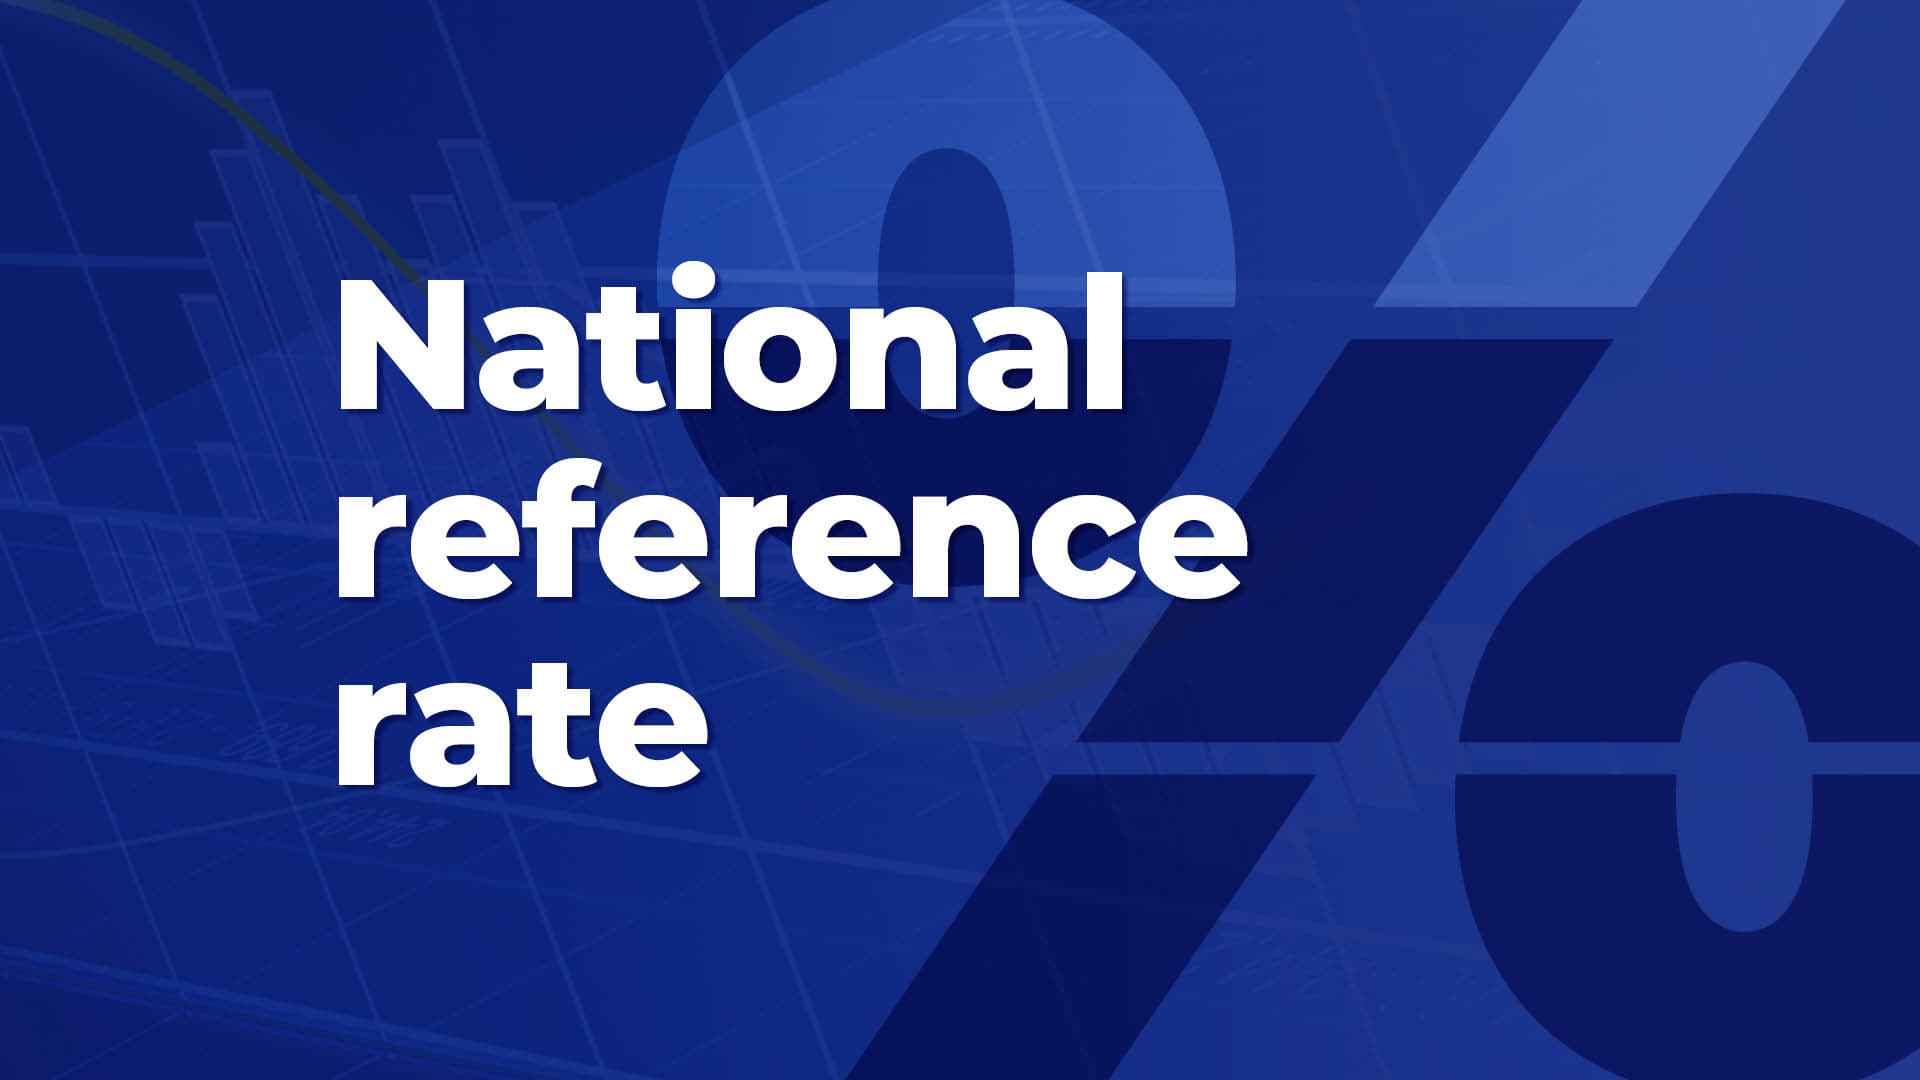 National reference rate (NRR) for 1Q 2023